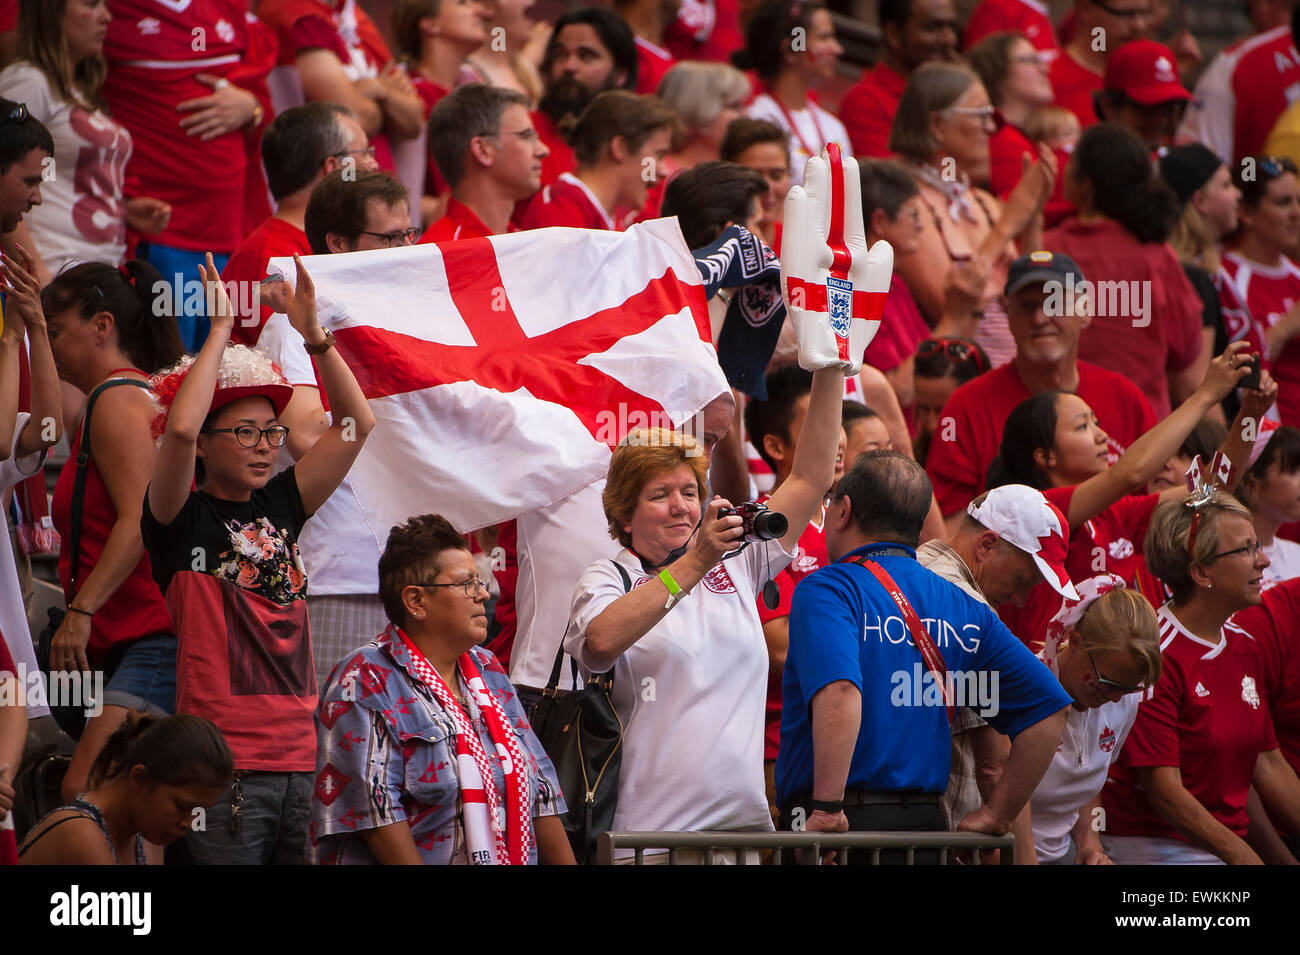 Vancouver, Canada. 27th June, 2015. England fans react following the quarterfinal match between Canada and England at the FIFA Women's World Cup Canada 2015 at BC Place Stadium. England won the match 2-1. Credit:  Matt Jacques/Alamy Live News Stock Photo